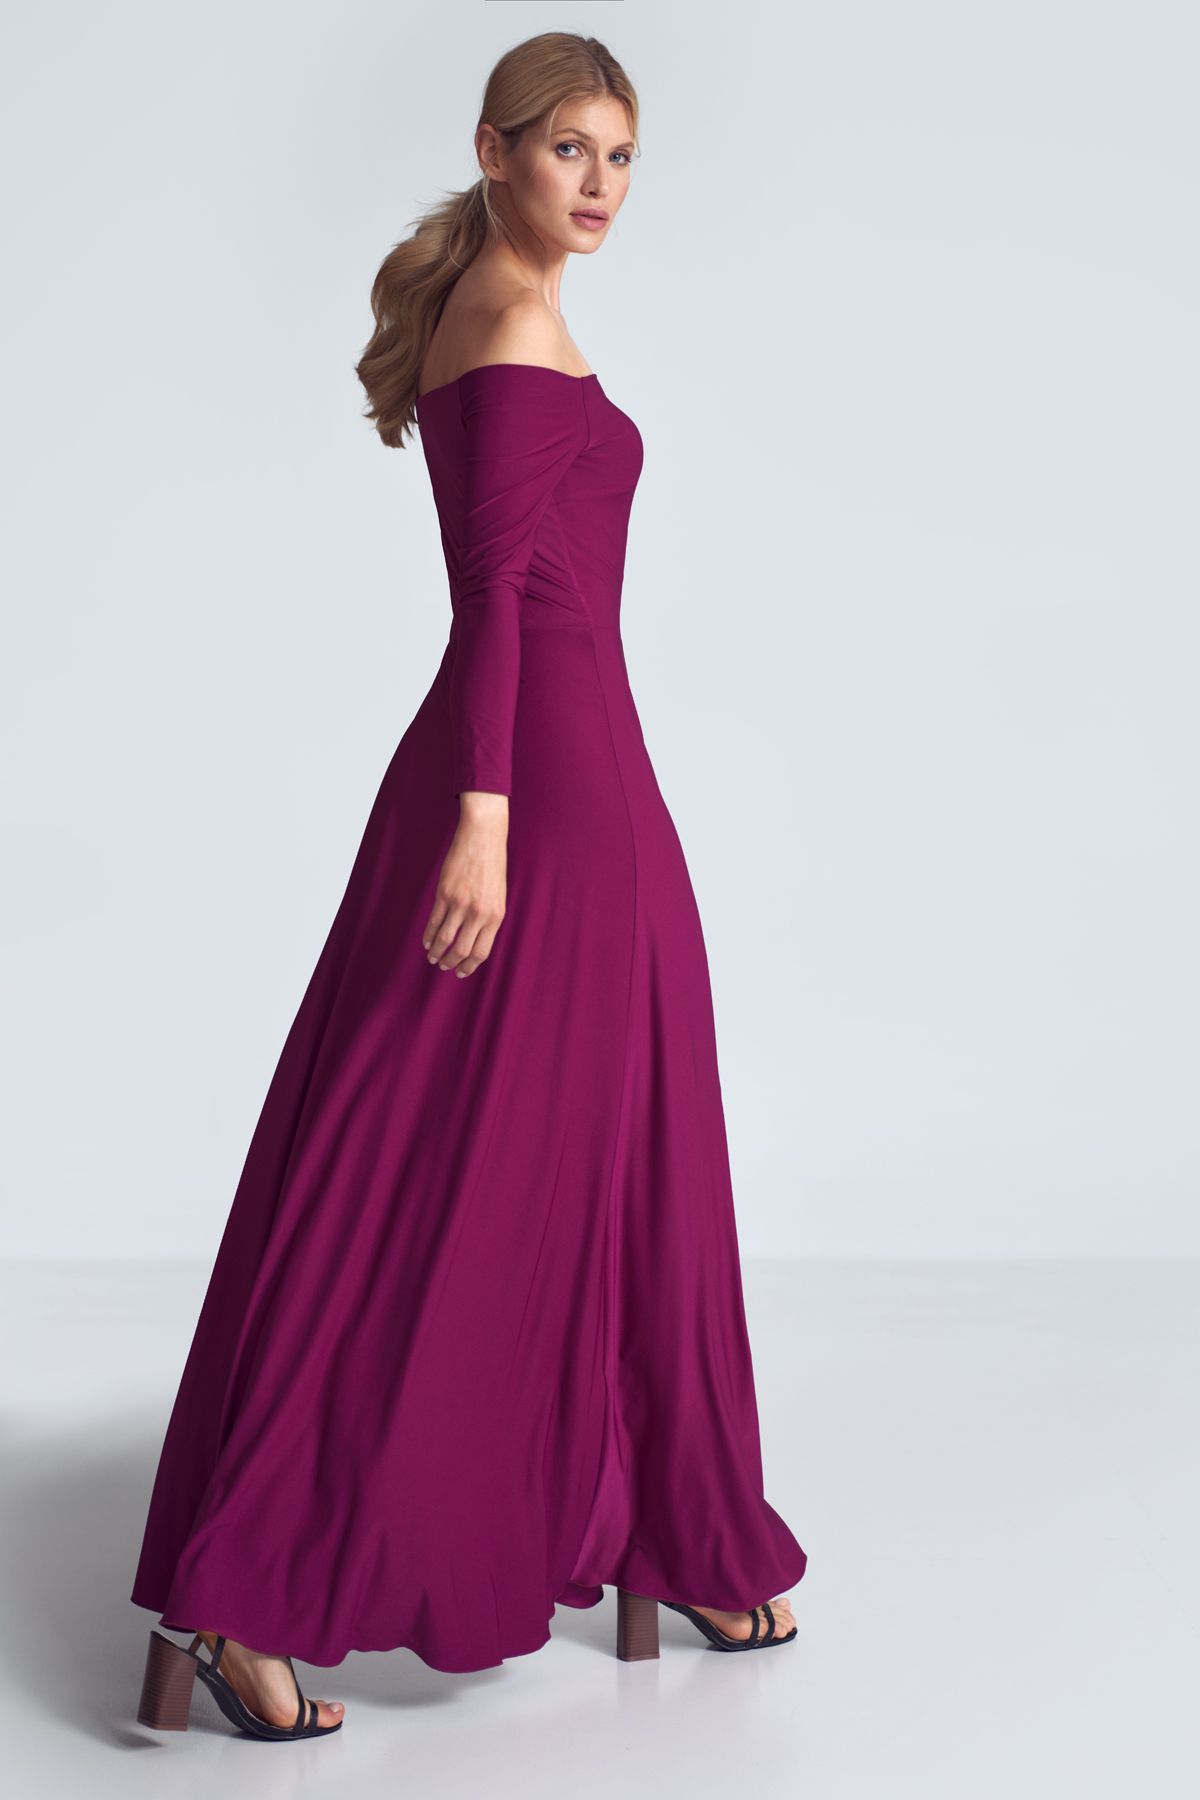 Fuchsia sensual maxi dress with long sleeves, large neckline - cold shoulders, pleats at the bust, sewn at the waist.